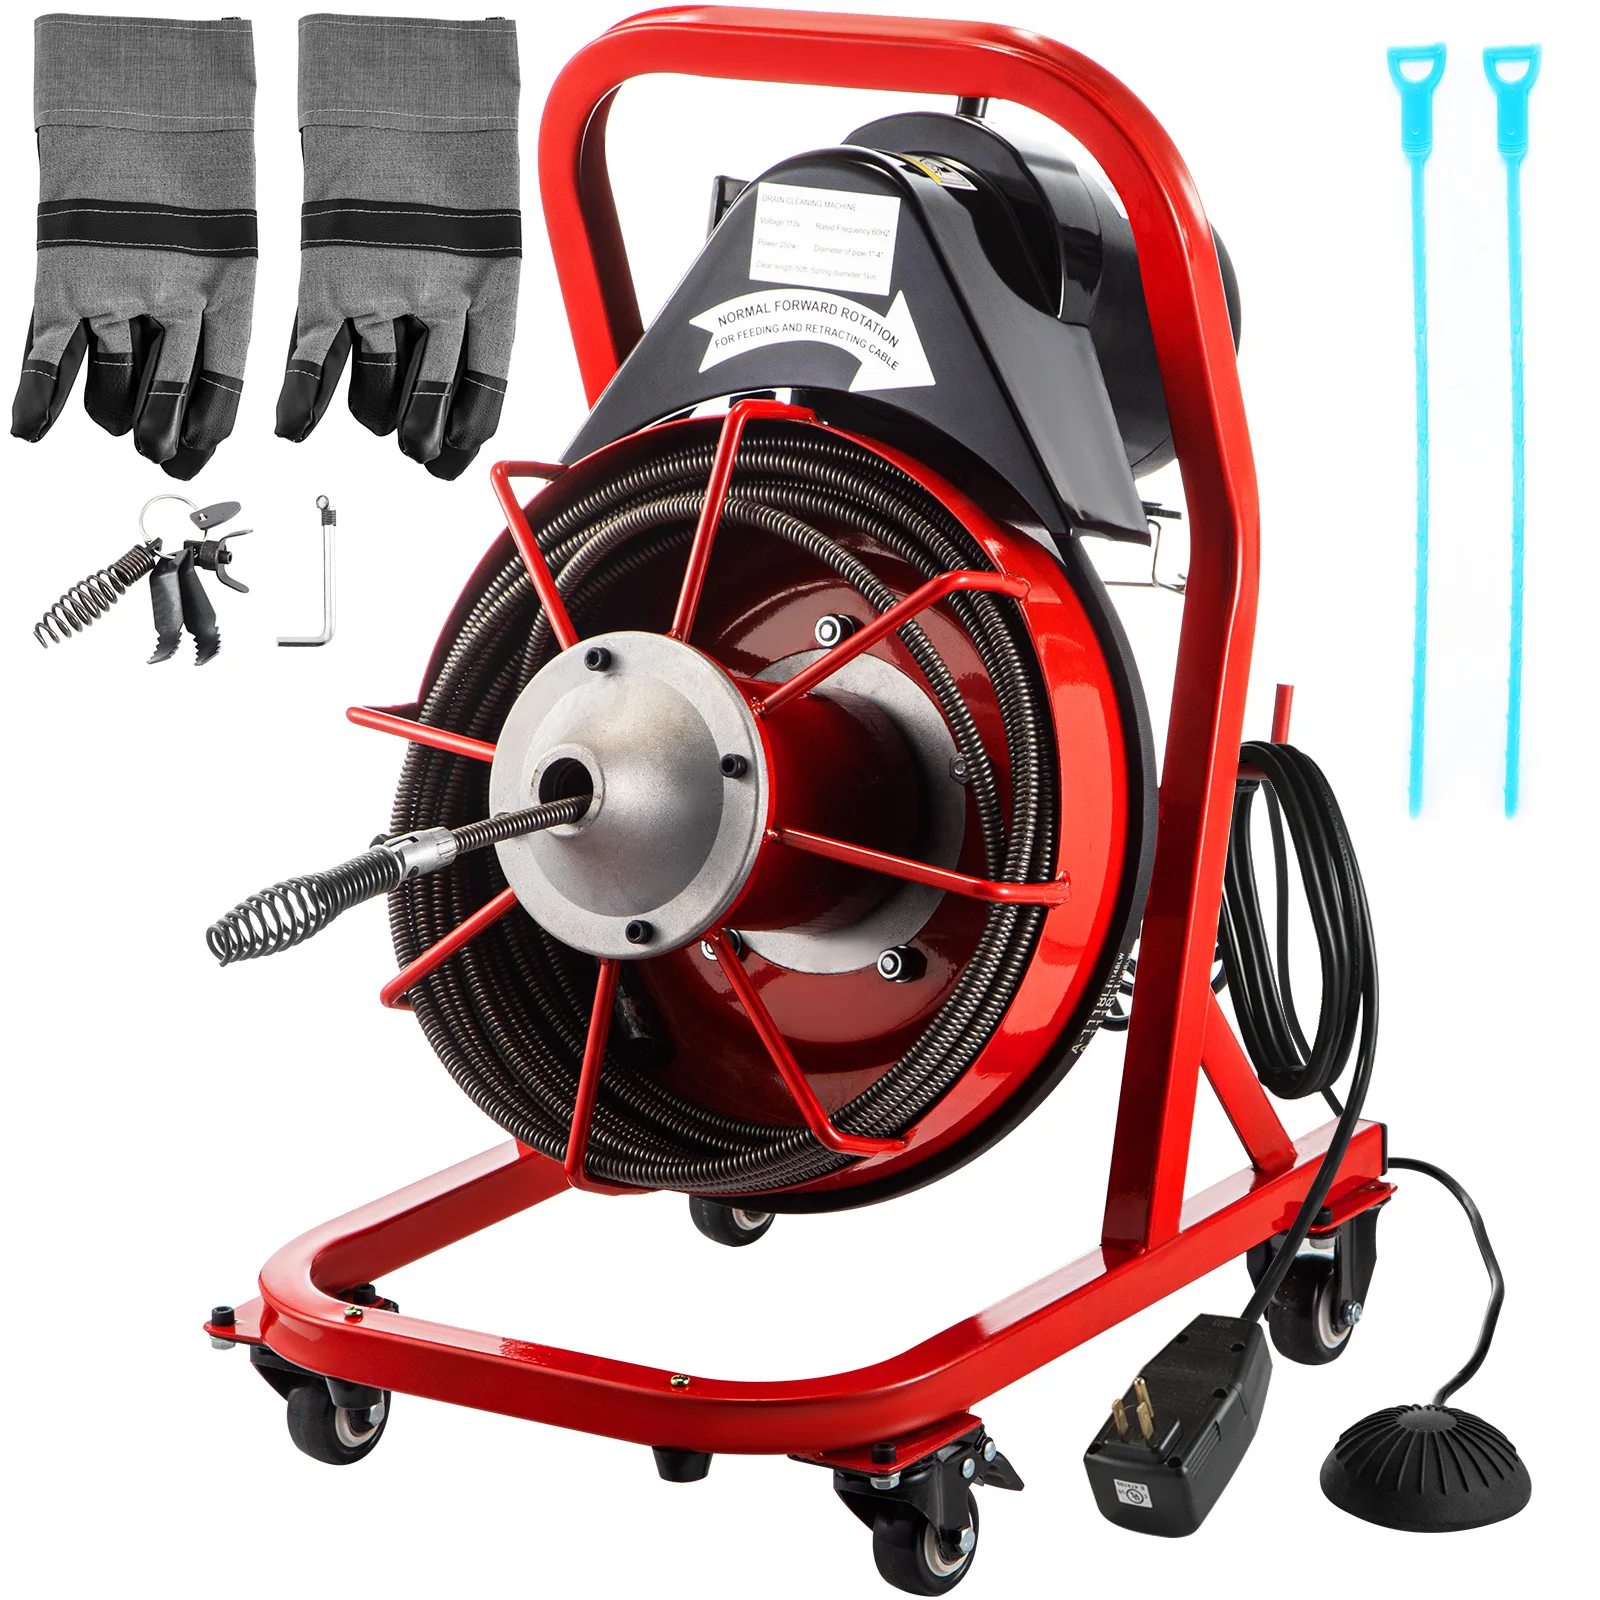 

VEVOR 3/8'' Compact Drain Auger Pipe Cleaner 50FT Mn Steel Core Cable Electric Cleaning Machine 370W for Toilets Sinks Showers